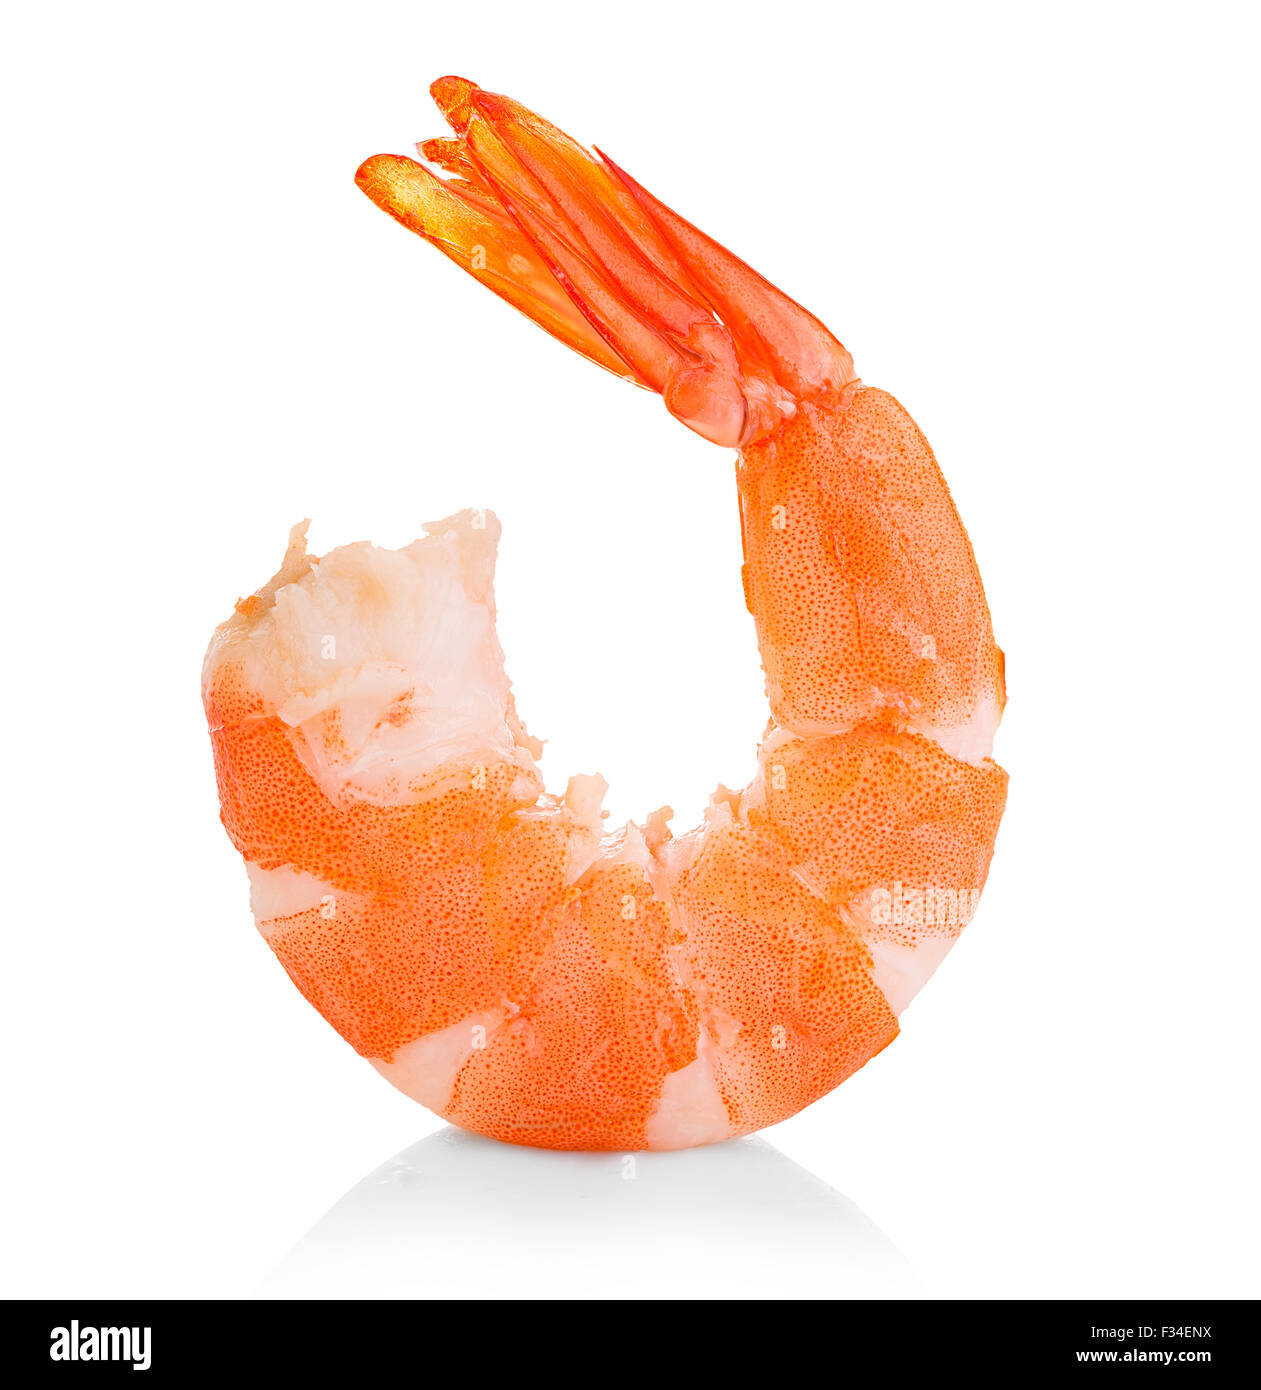 Tiger shrimp. Prawn isolated on a white background. Seafood Stock Photo